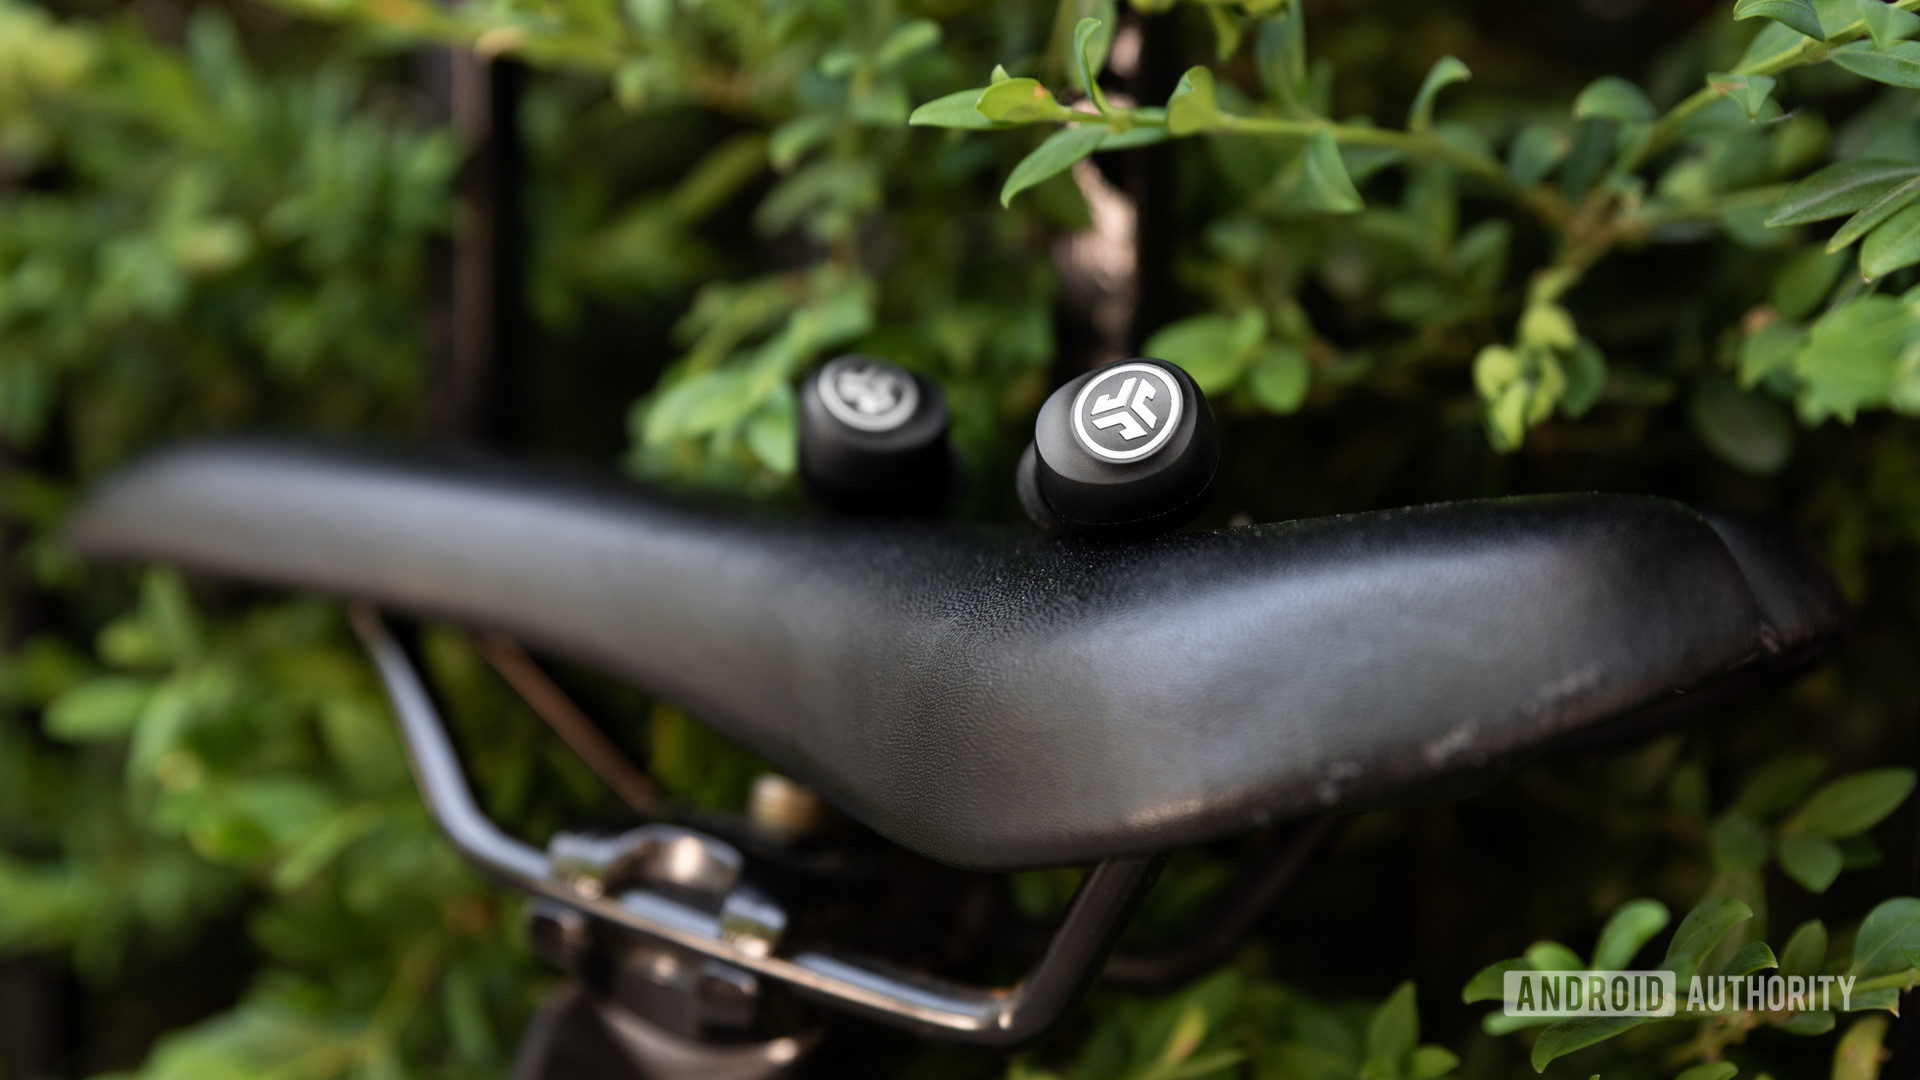 A photo of the JLab GO Air cheap true wireless earbuds sitting atop a bike saddle.